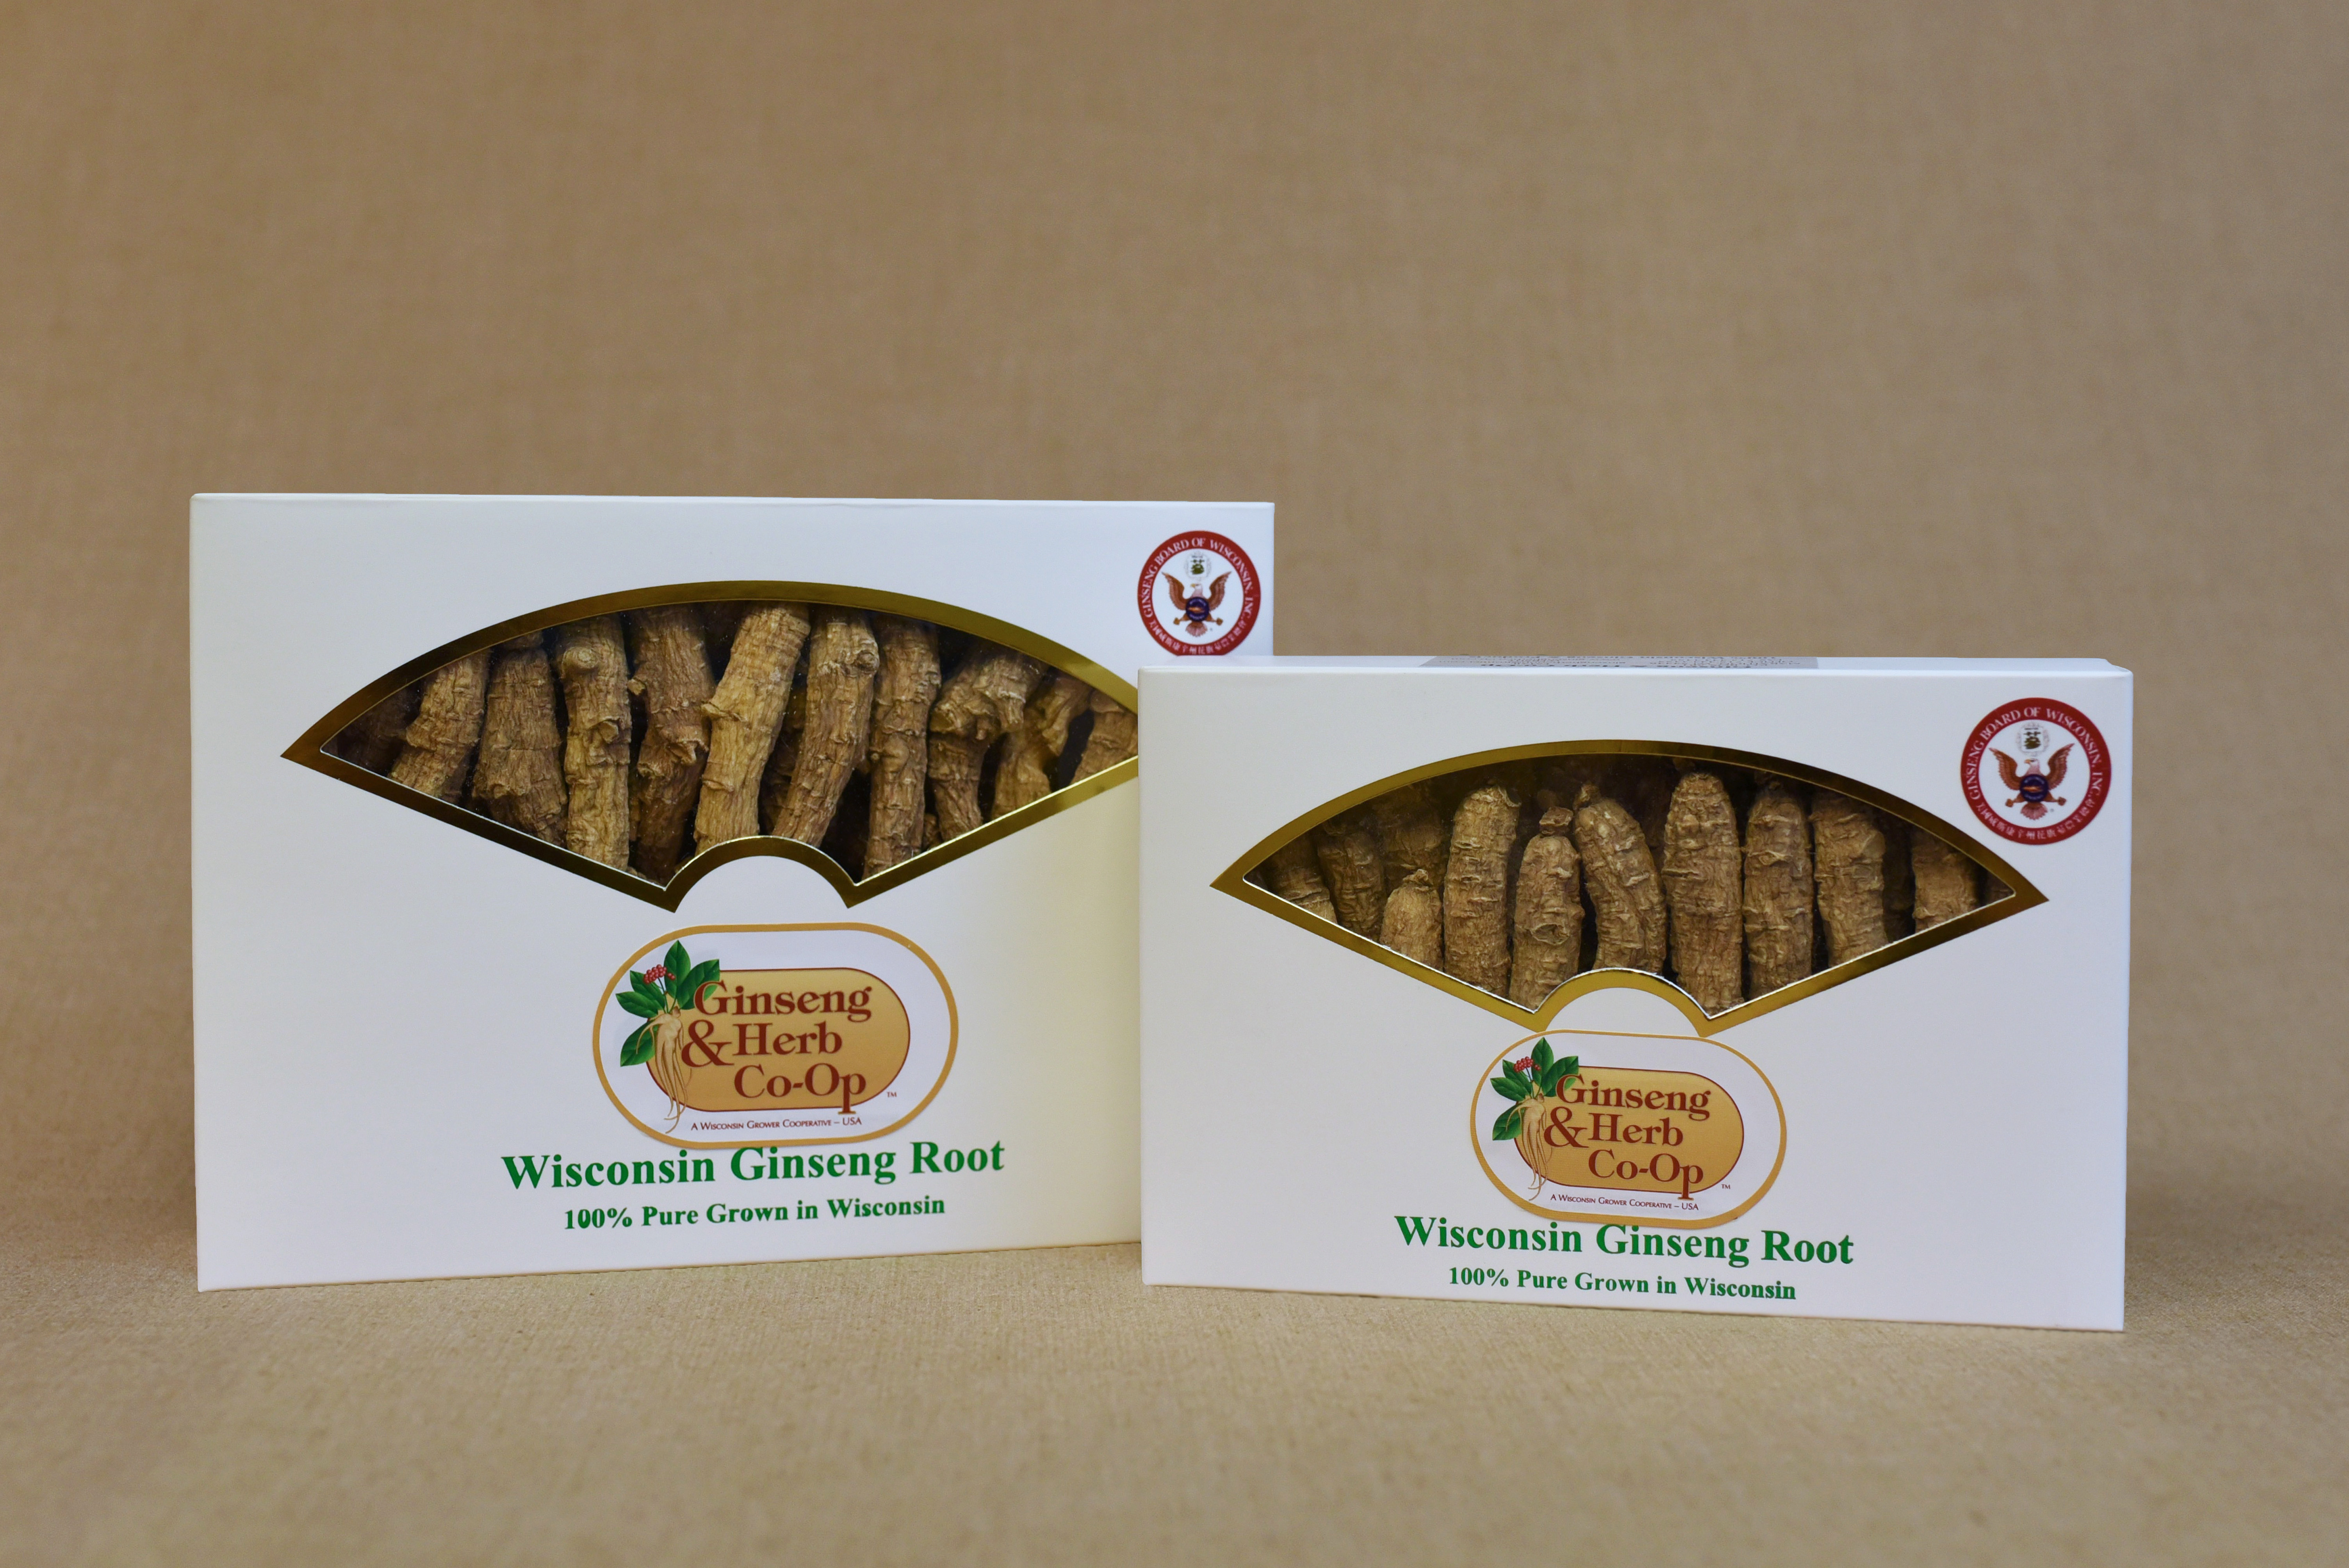 Buy Now! high quality Wisconsin Ginseng roots in Janesville, WI